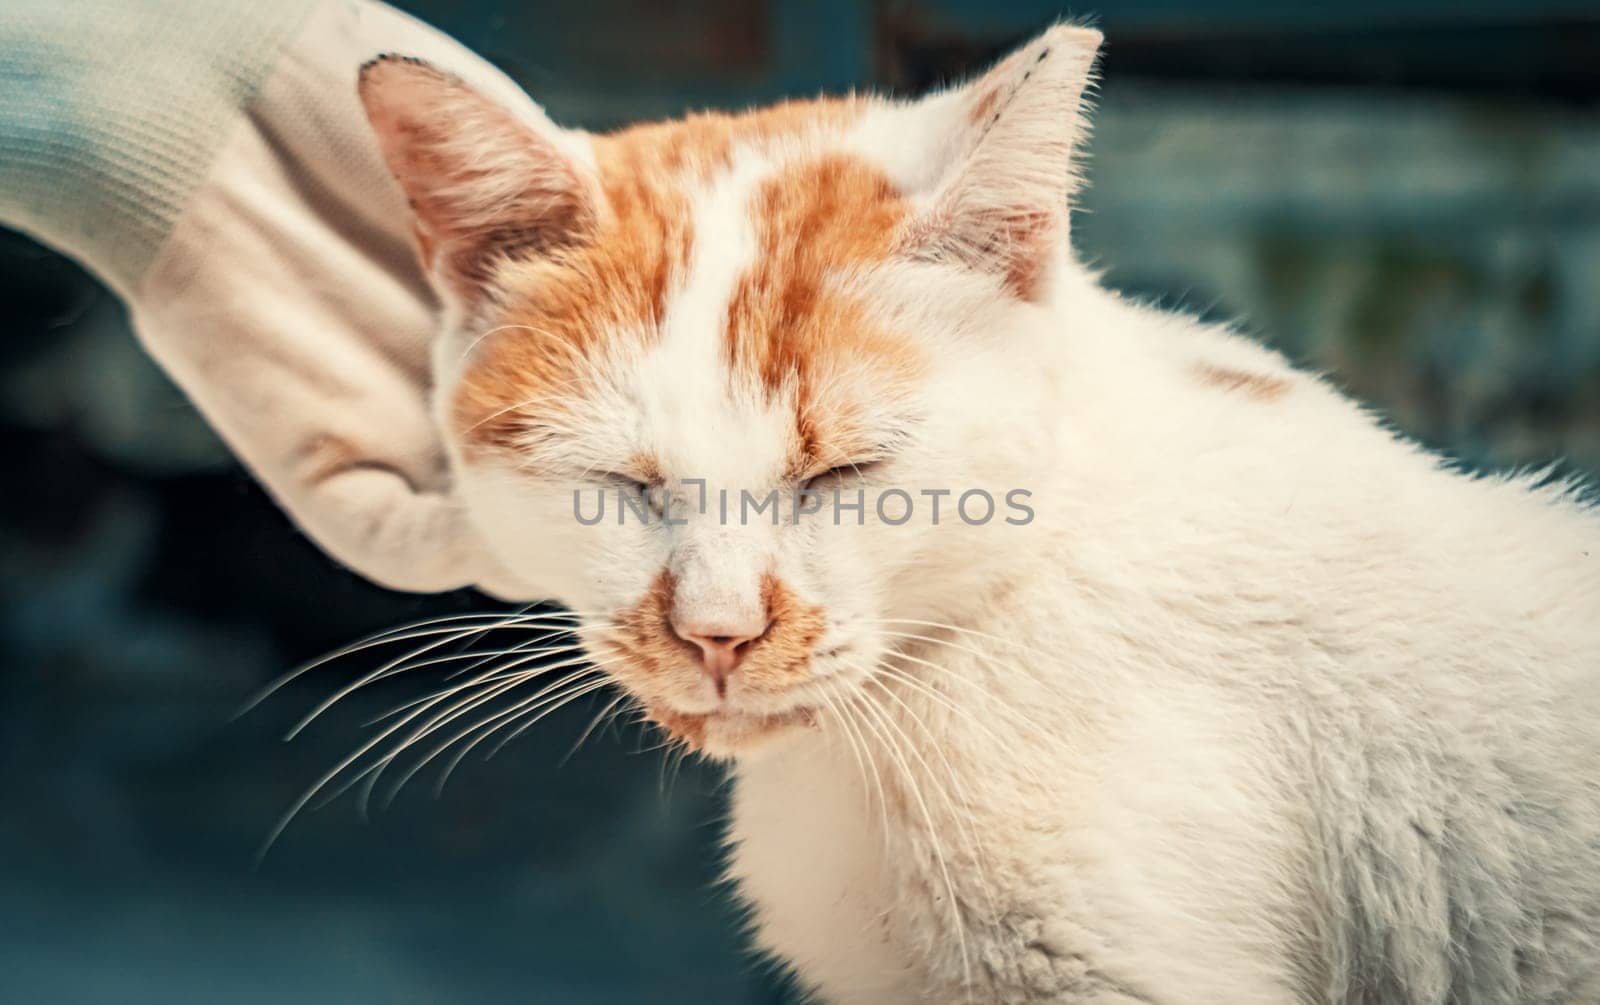 Close-up of volunteer's hand petting caged stray cat in pet shelter. People, Animals, Volunteering And Helping Concept. by Busker